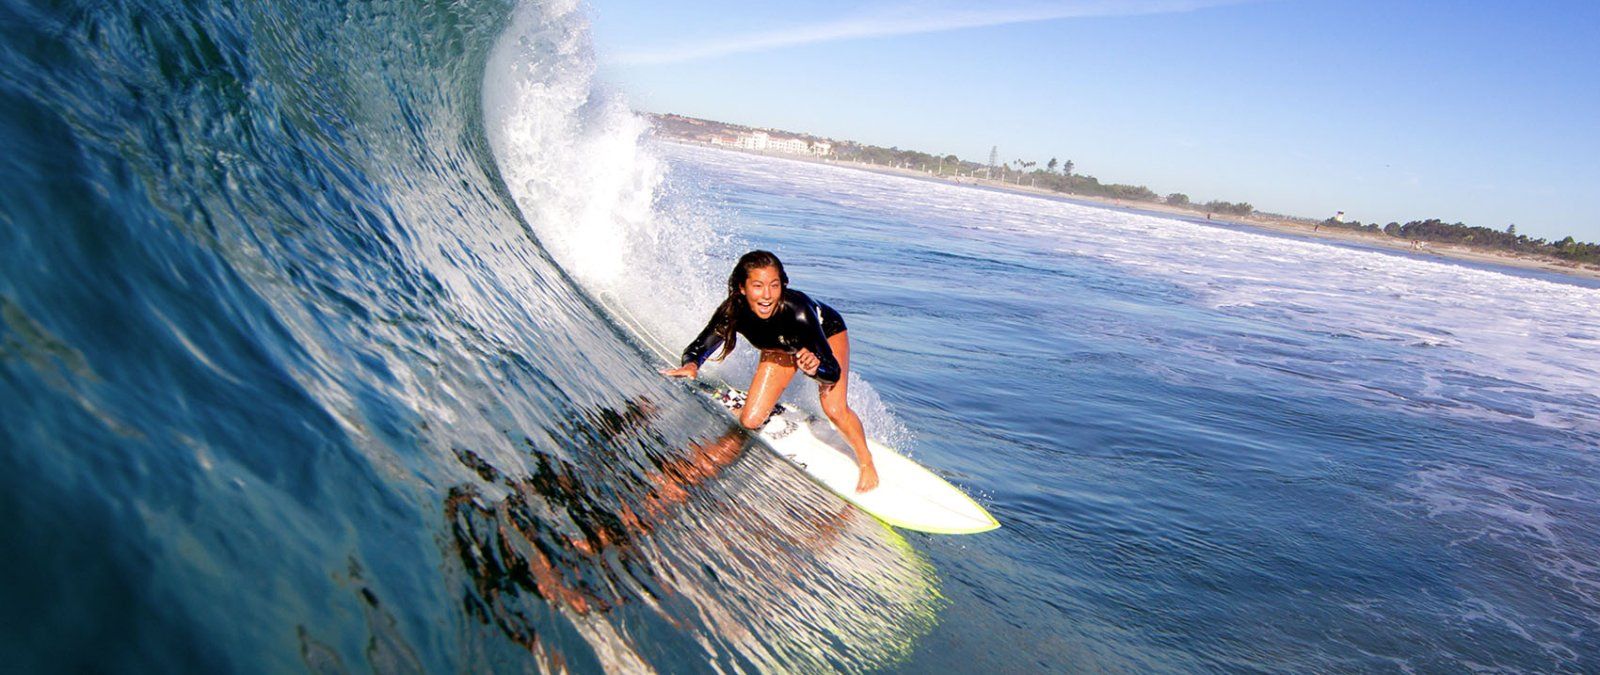 A PLNU female student surfs on a curling wave in San Diego